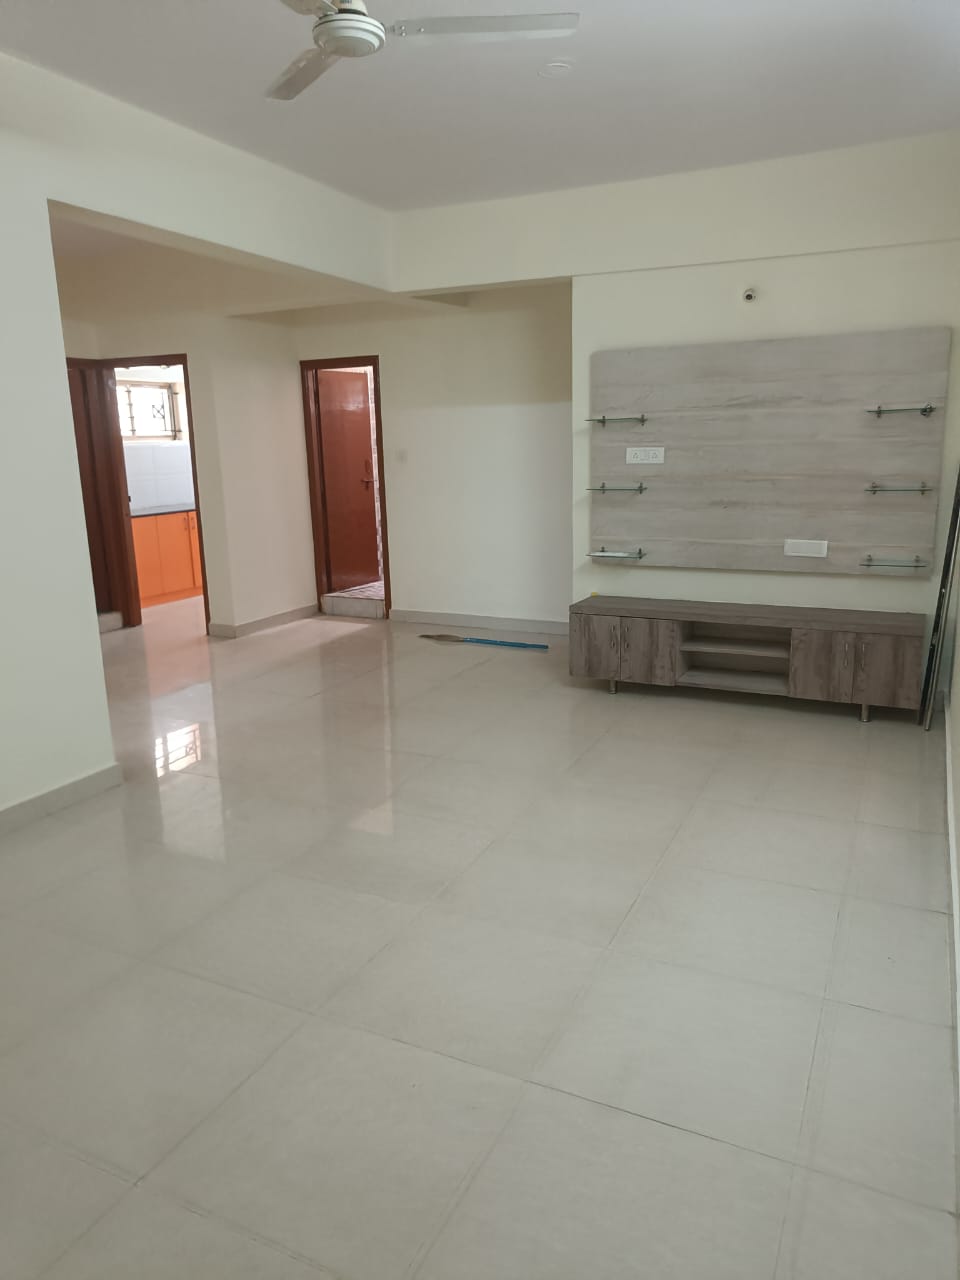 3 BHK Independent House for Lease Only at JAML2 - 2602 in Benson Town